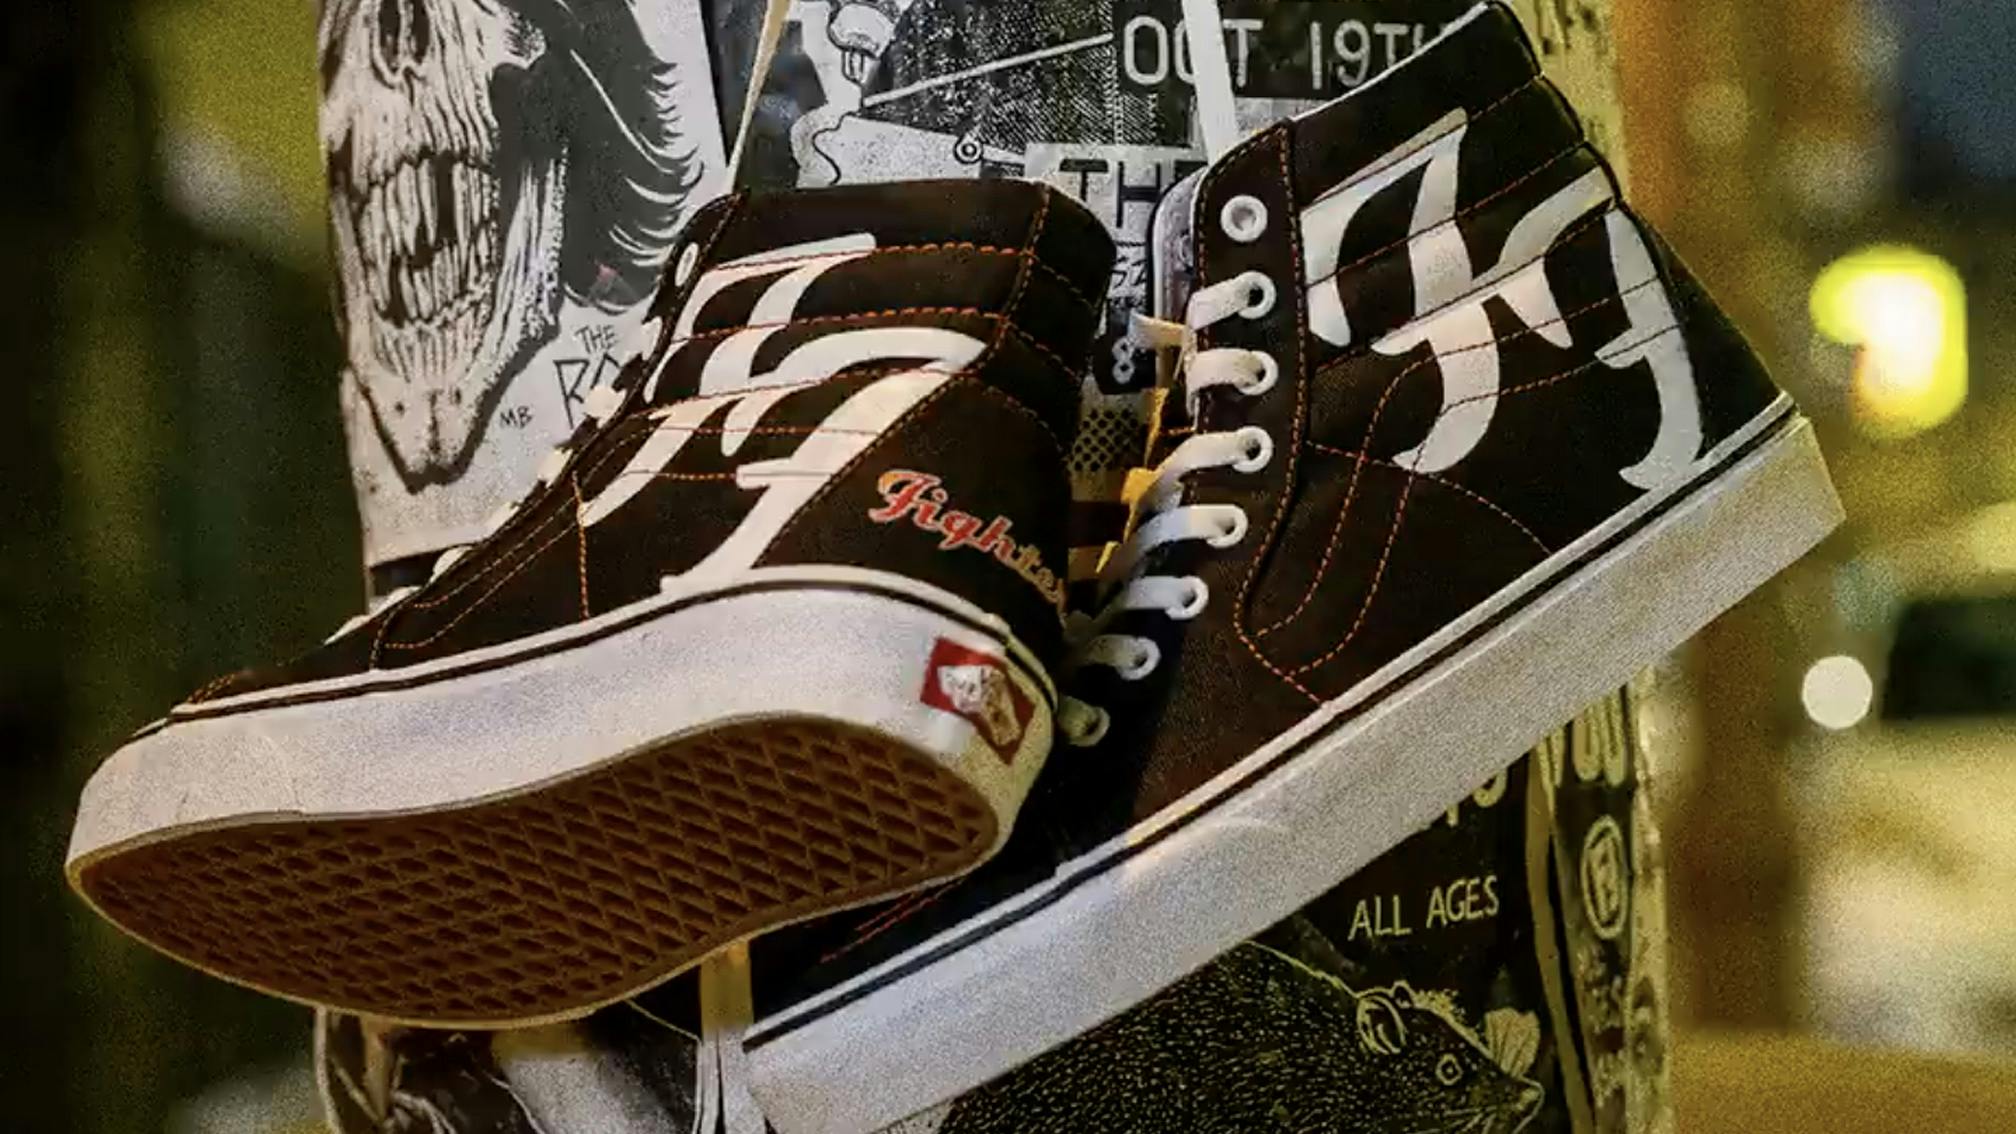 Foo Fighters and Vans team up for limited-edition Sk8-Hi trainers